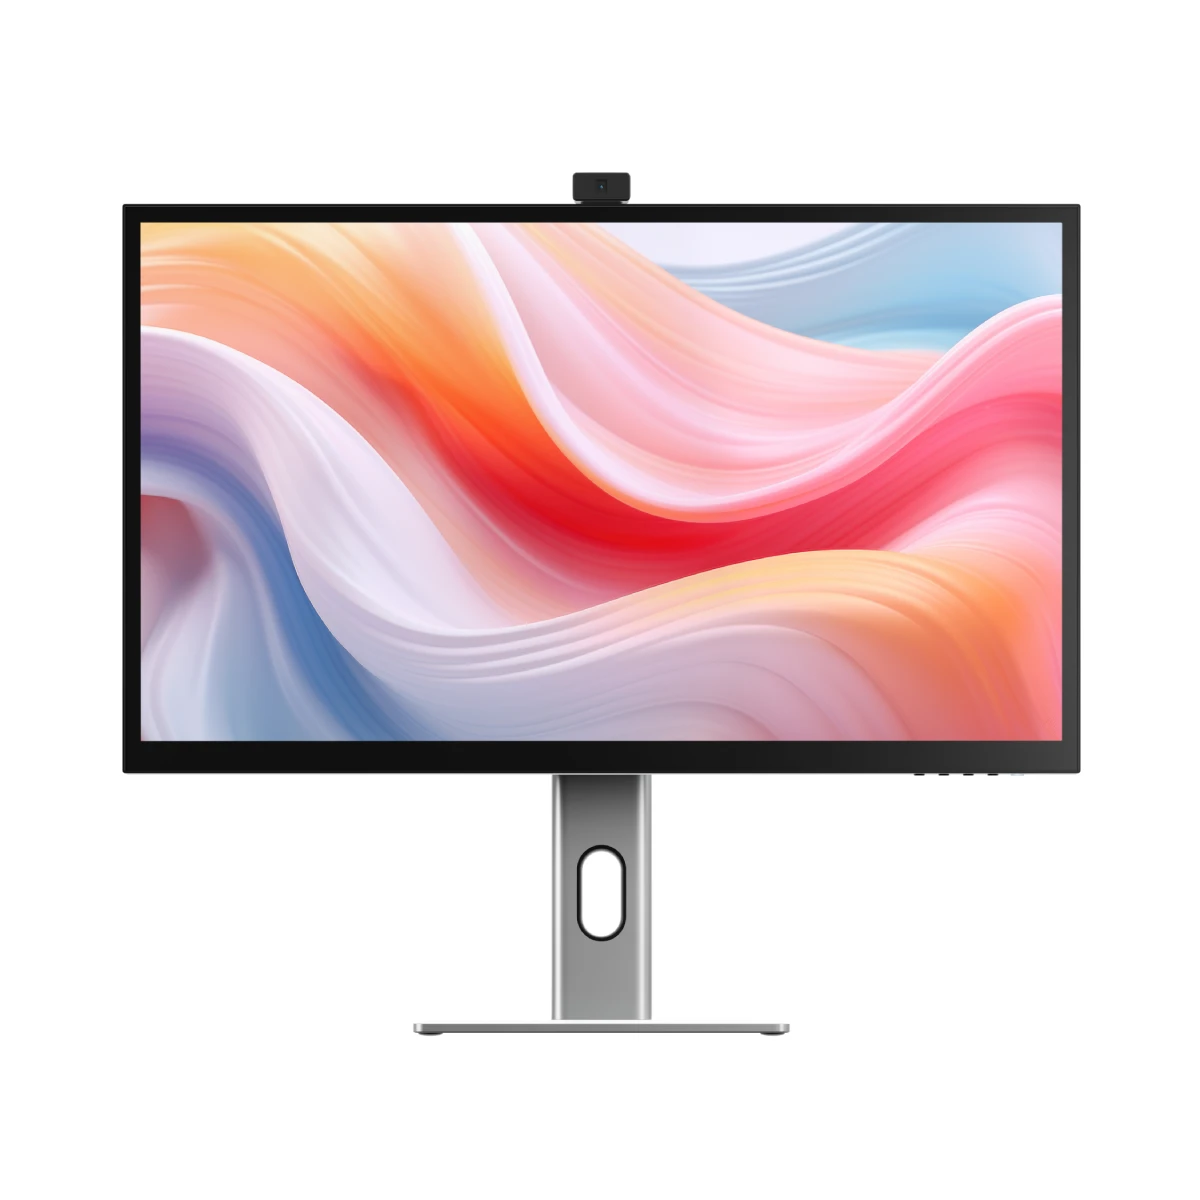 clarity-pro-27-uhd-4k-monitor-with-65w-pd-and-webcam-pack-of-22